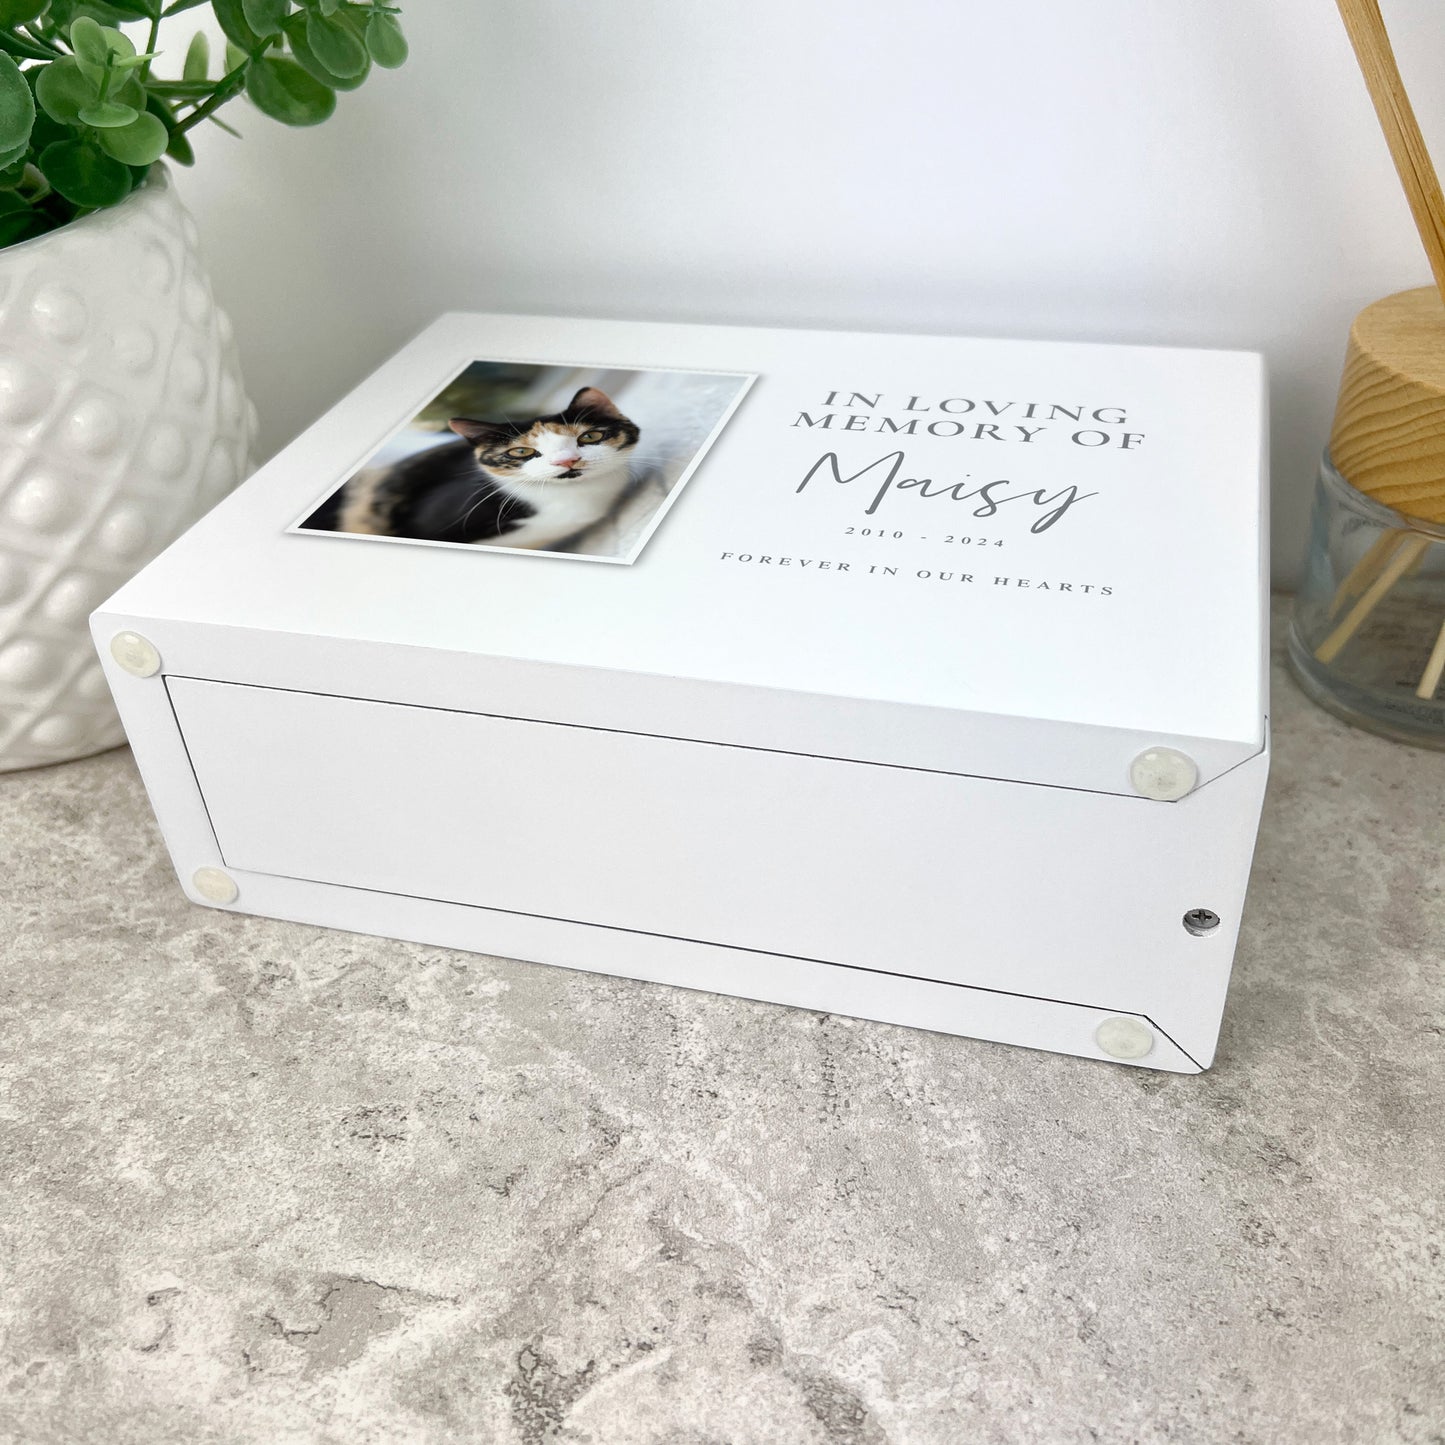 Personalised In Loving Memory Photo Cremation Urn For Pets Ashes | 1.09 Litres